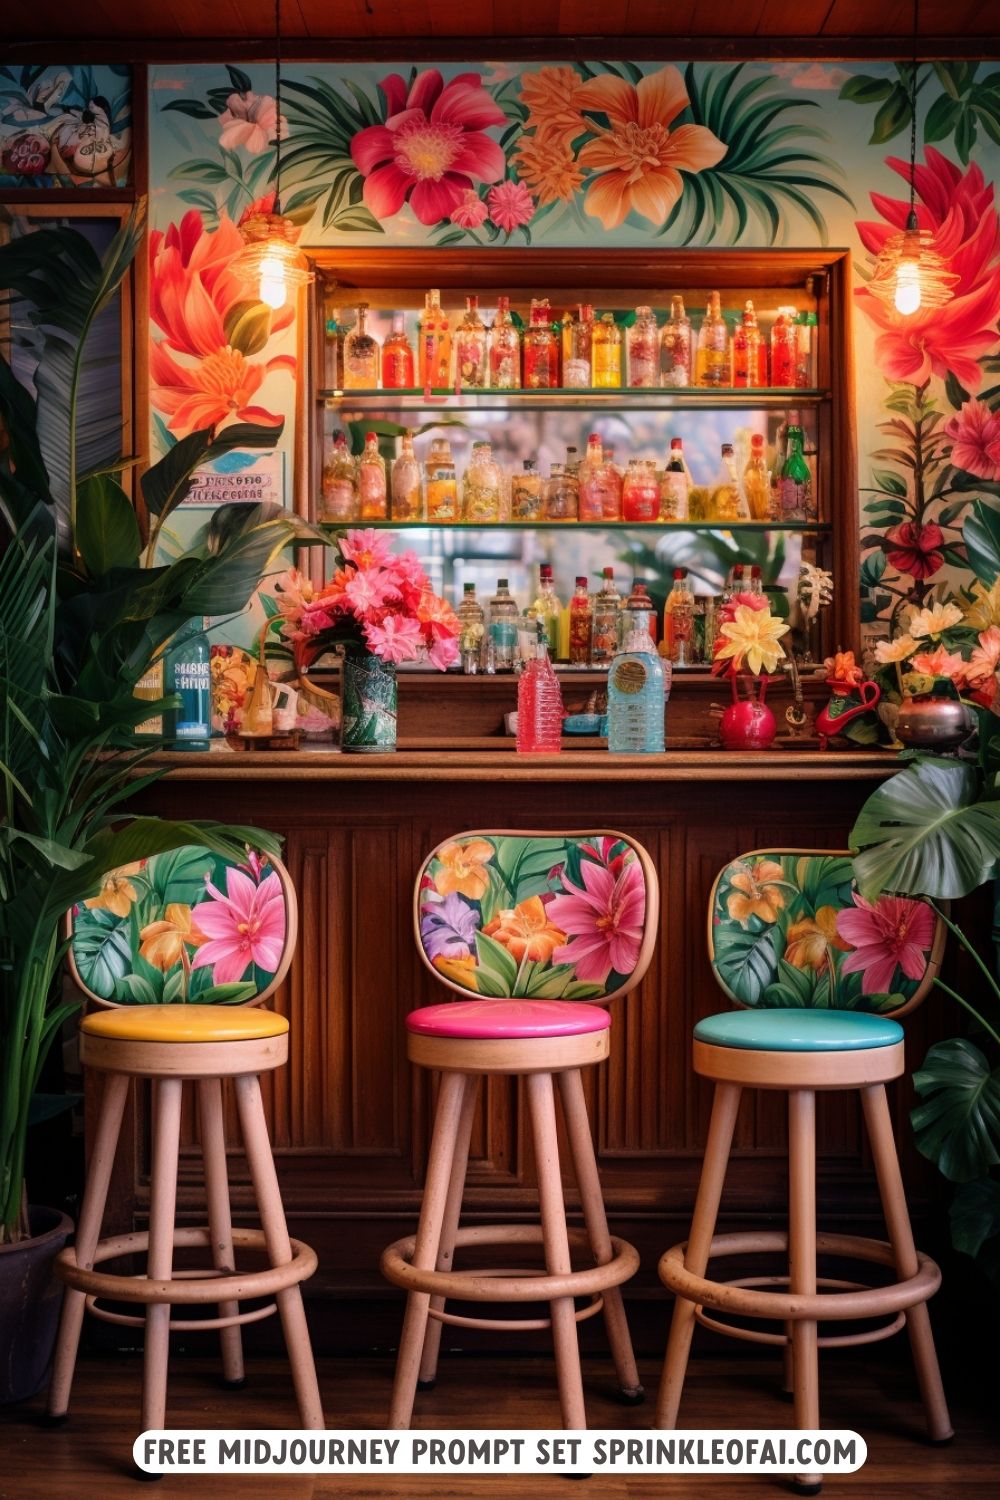 Free Midjourney Prompt Set - Happy Hour Cocktail Bar Prompts - Hawaii Fashion Prompts - Midjourney for Beginners - Sprinkle of AI